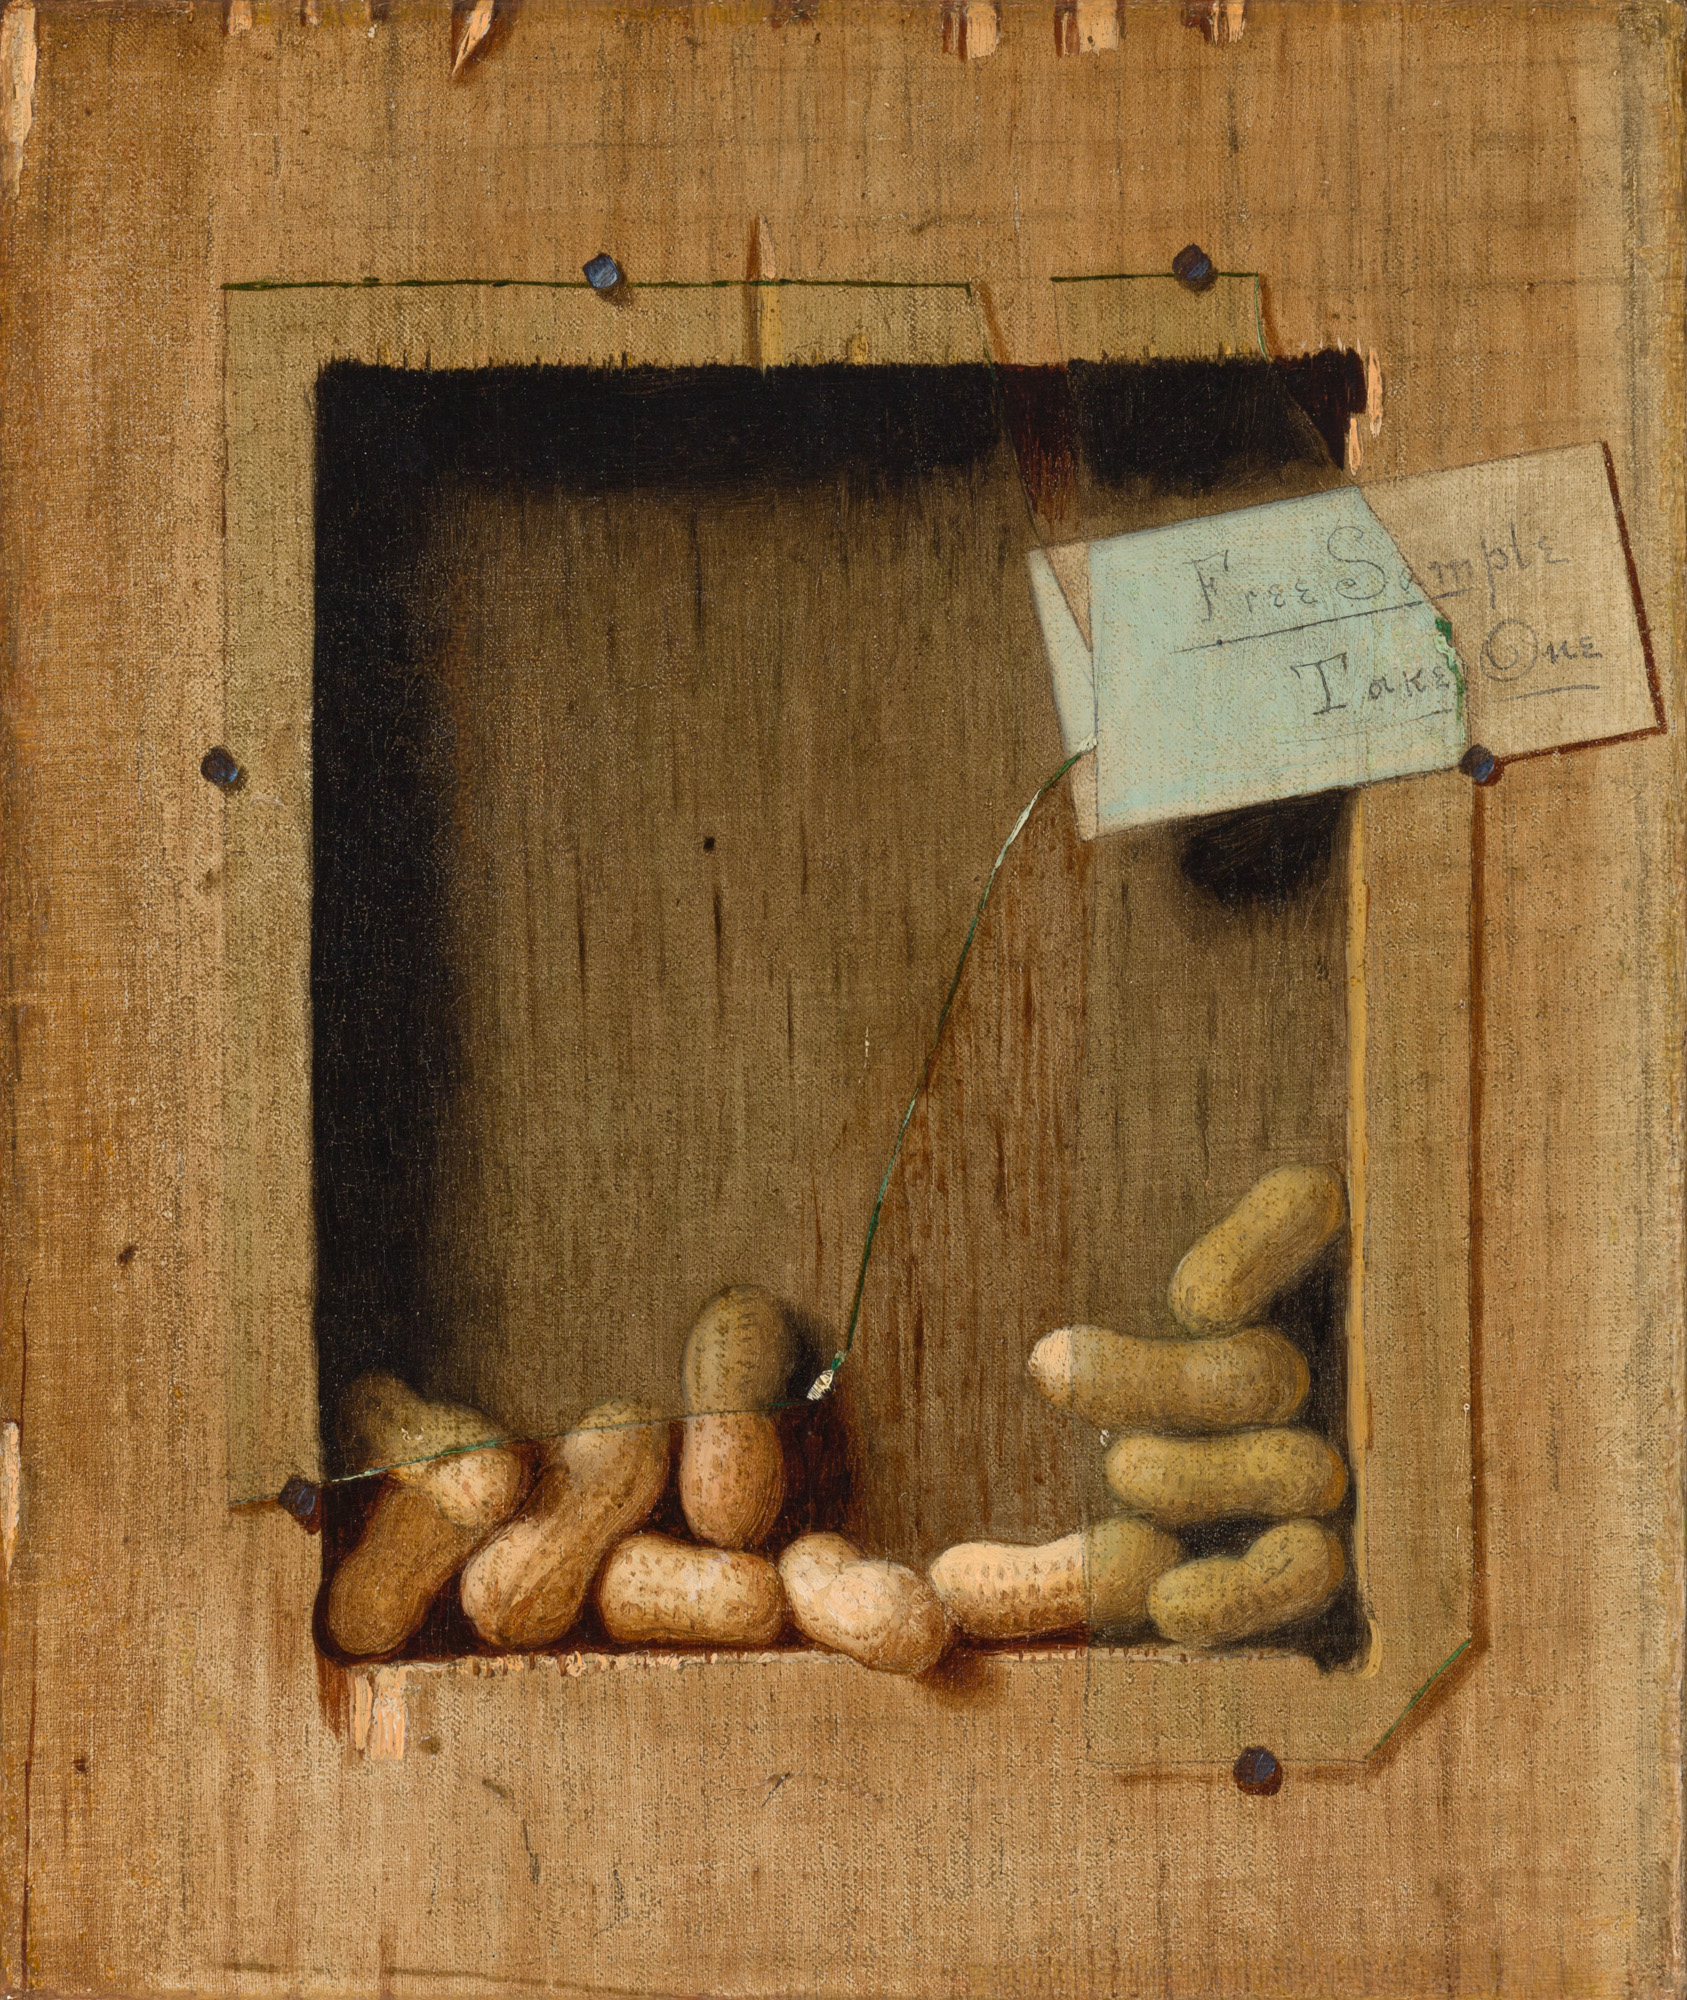 This Tromp L'oeil piece features a broken cupboard with peanuts falling out. There is a sign stuck into the glass that reads 